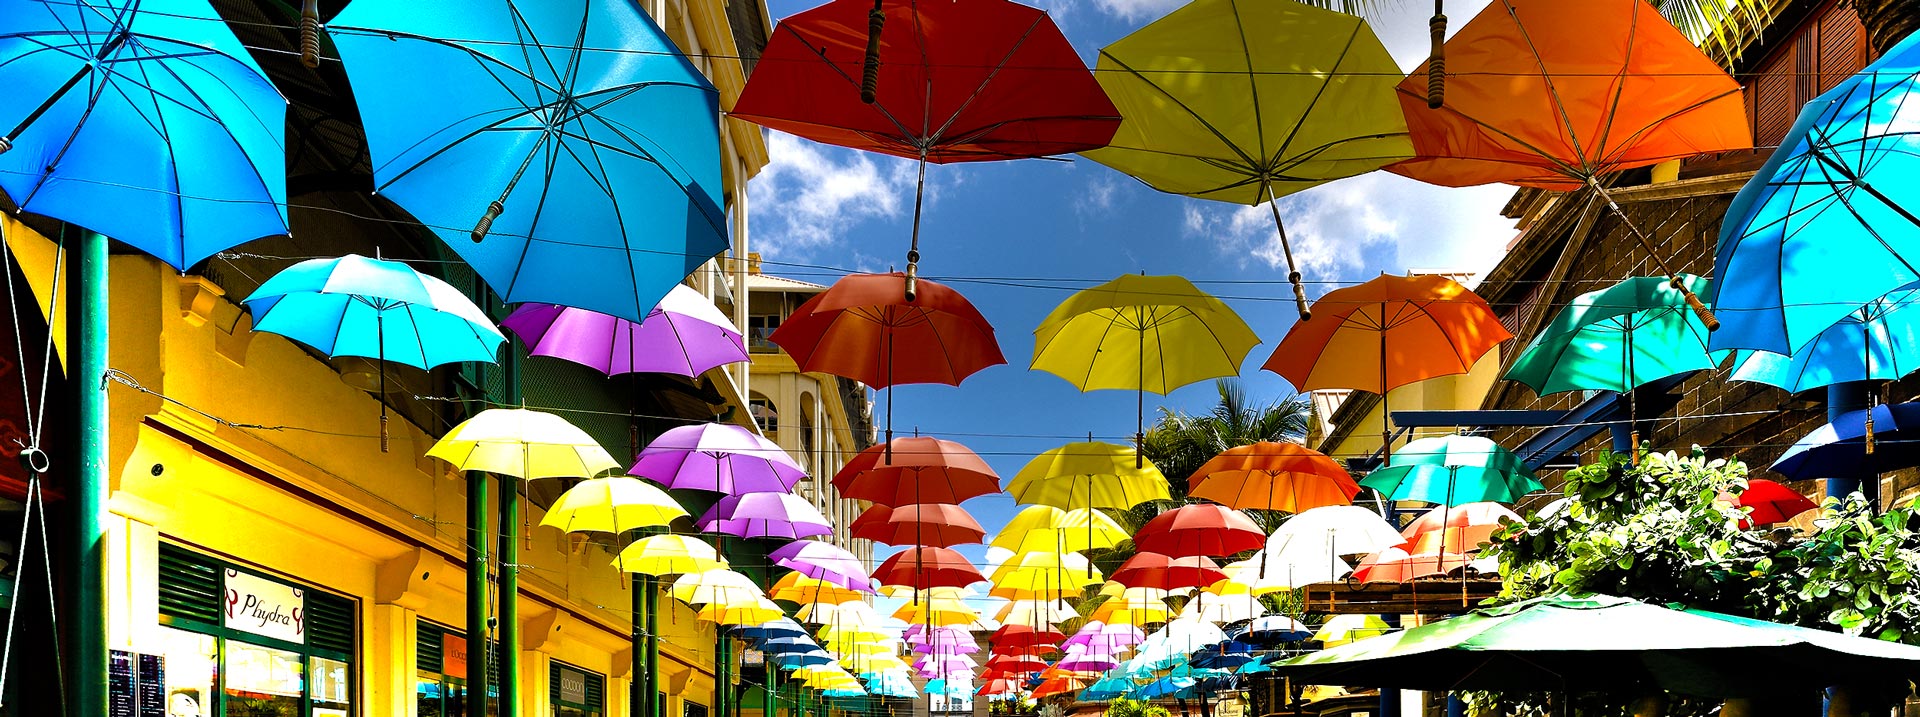 keeping-cool-in-the-shade-umbrellas